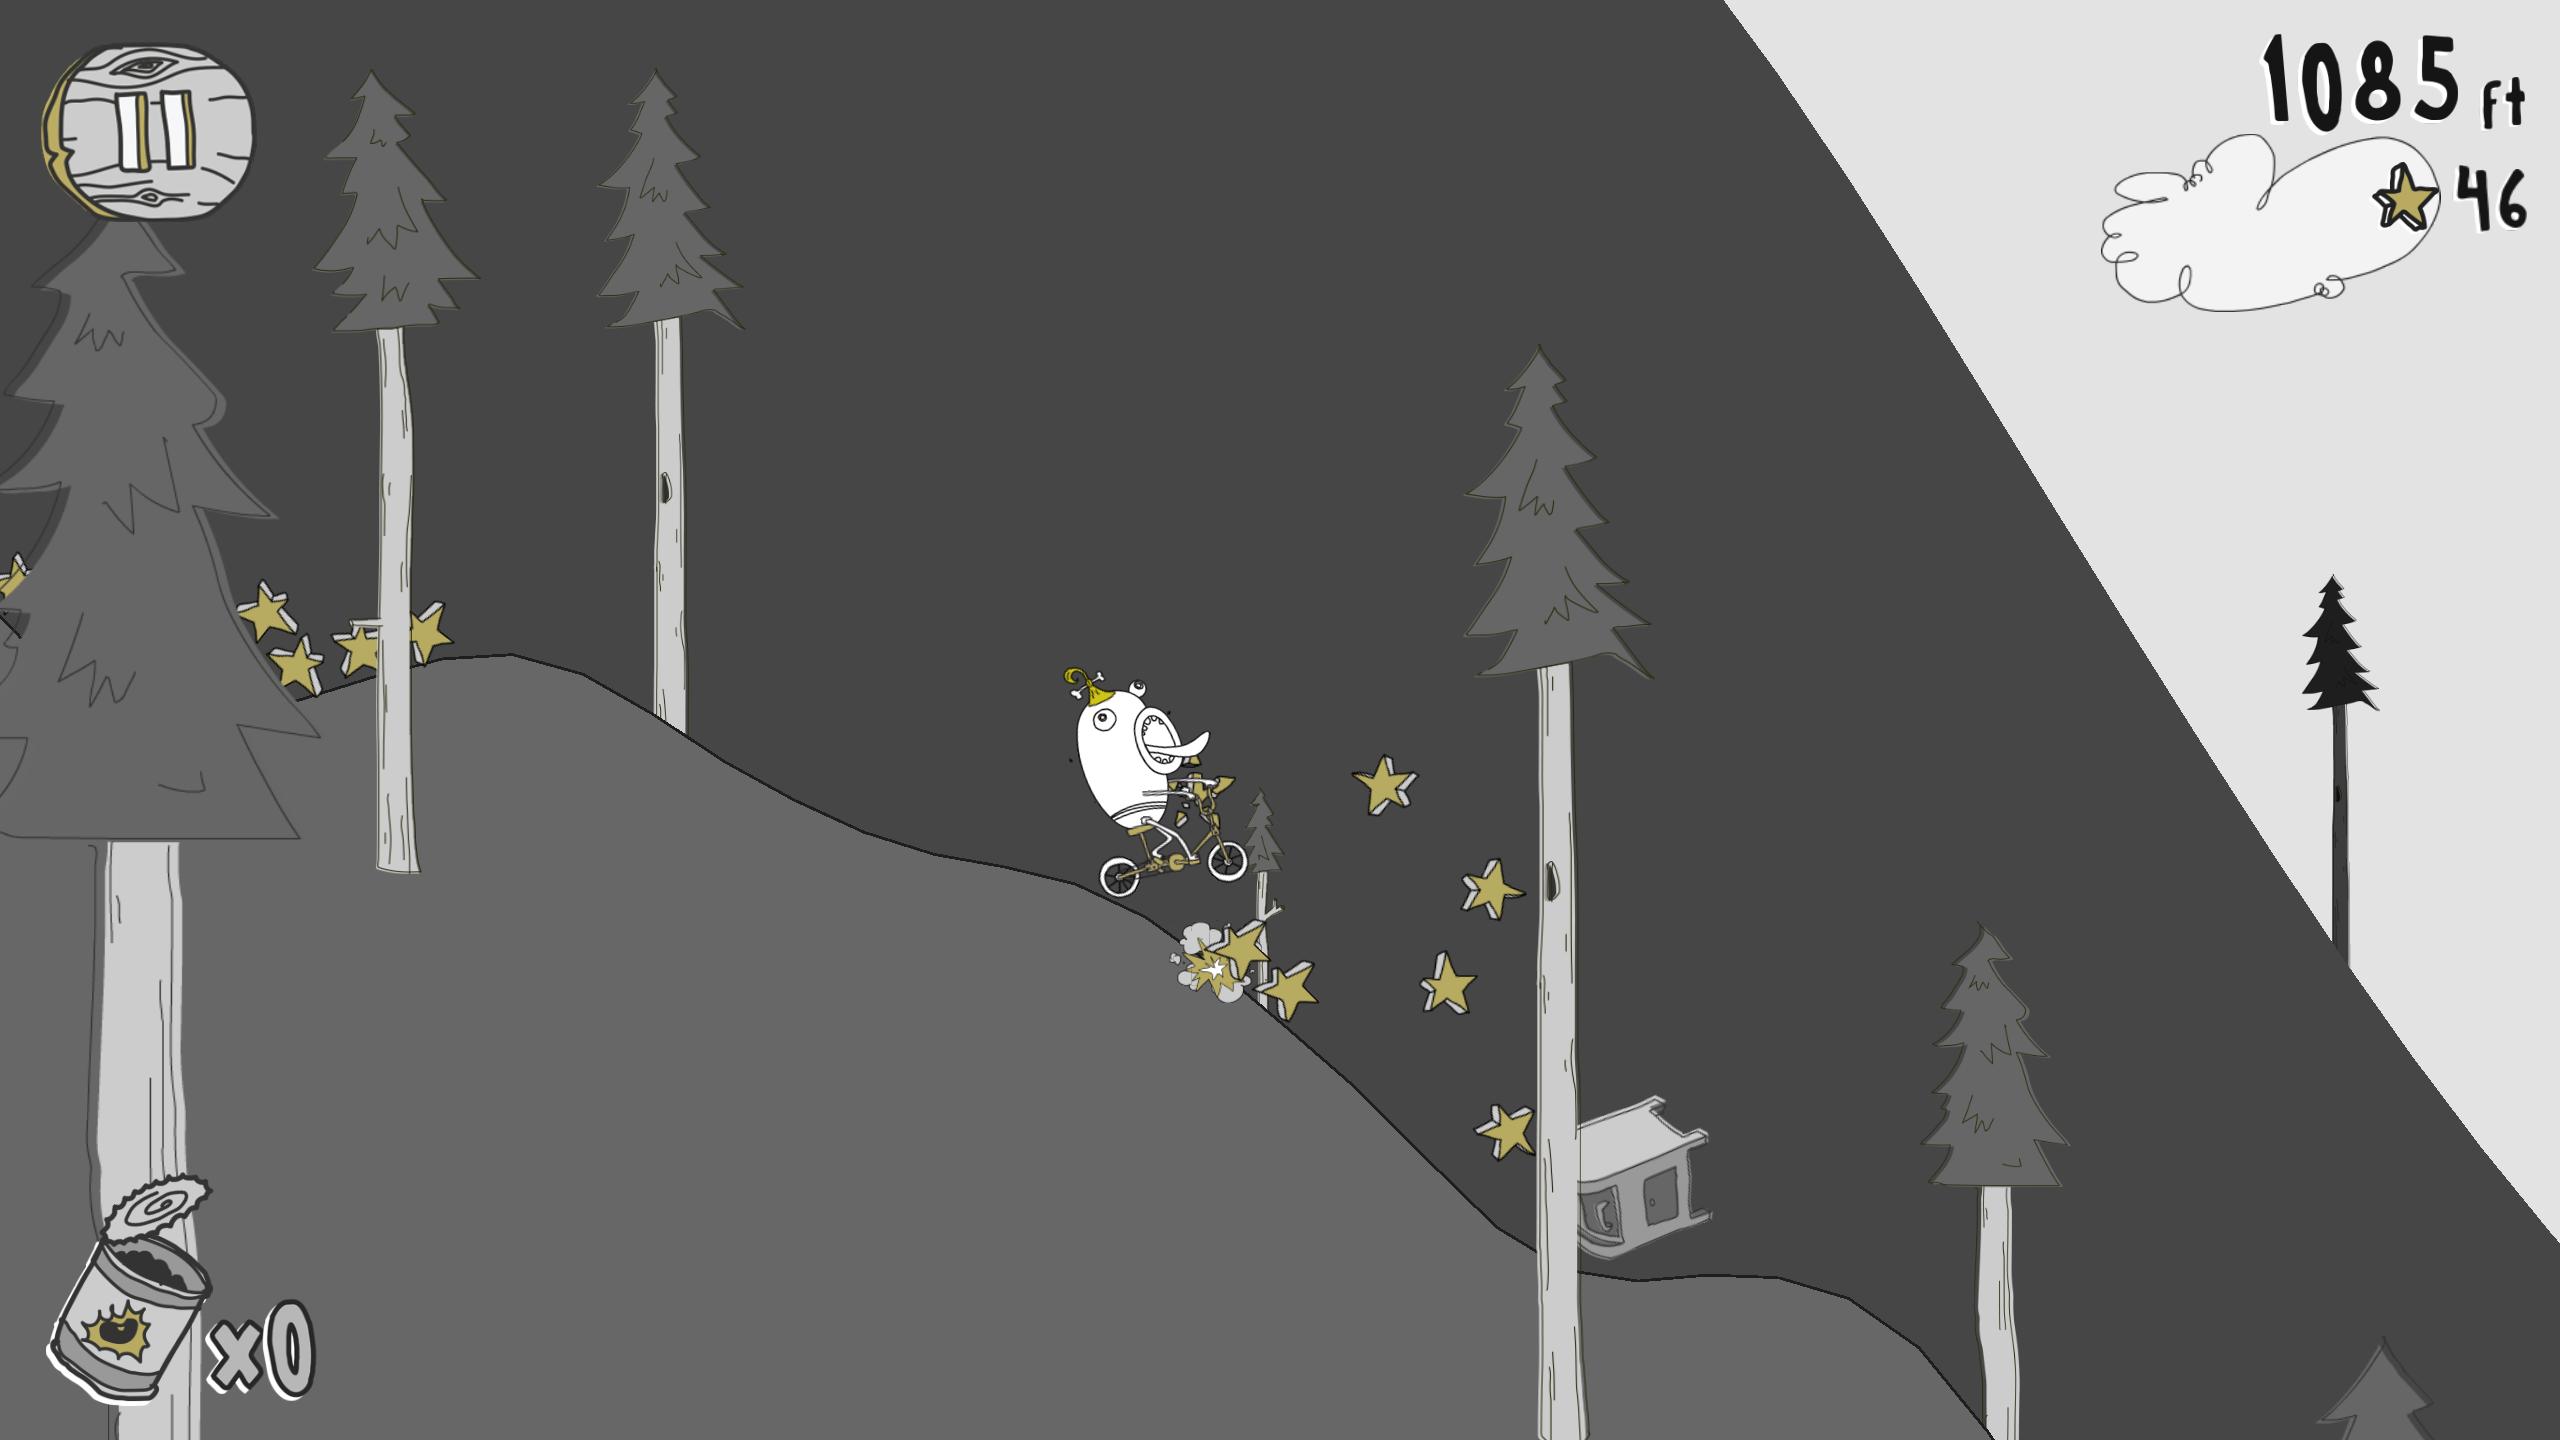 Doofus Drop Silly Rider - Learn to Fart & Fly 1.0.23 Screenshot 13